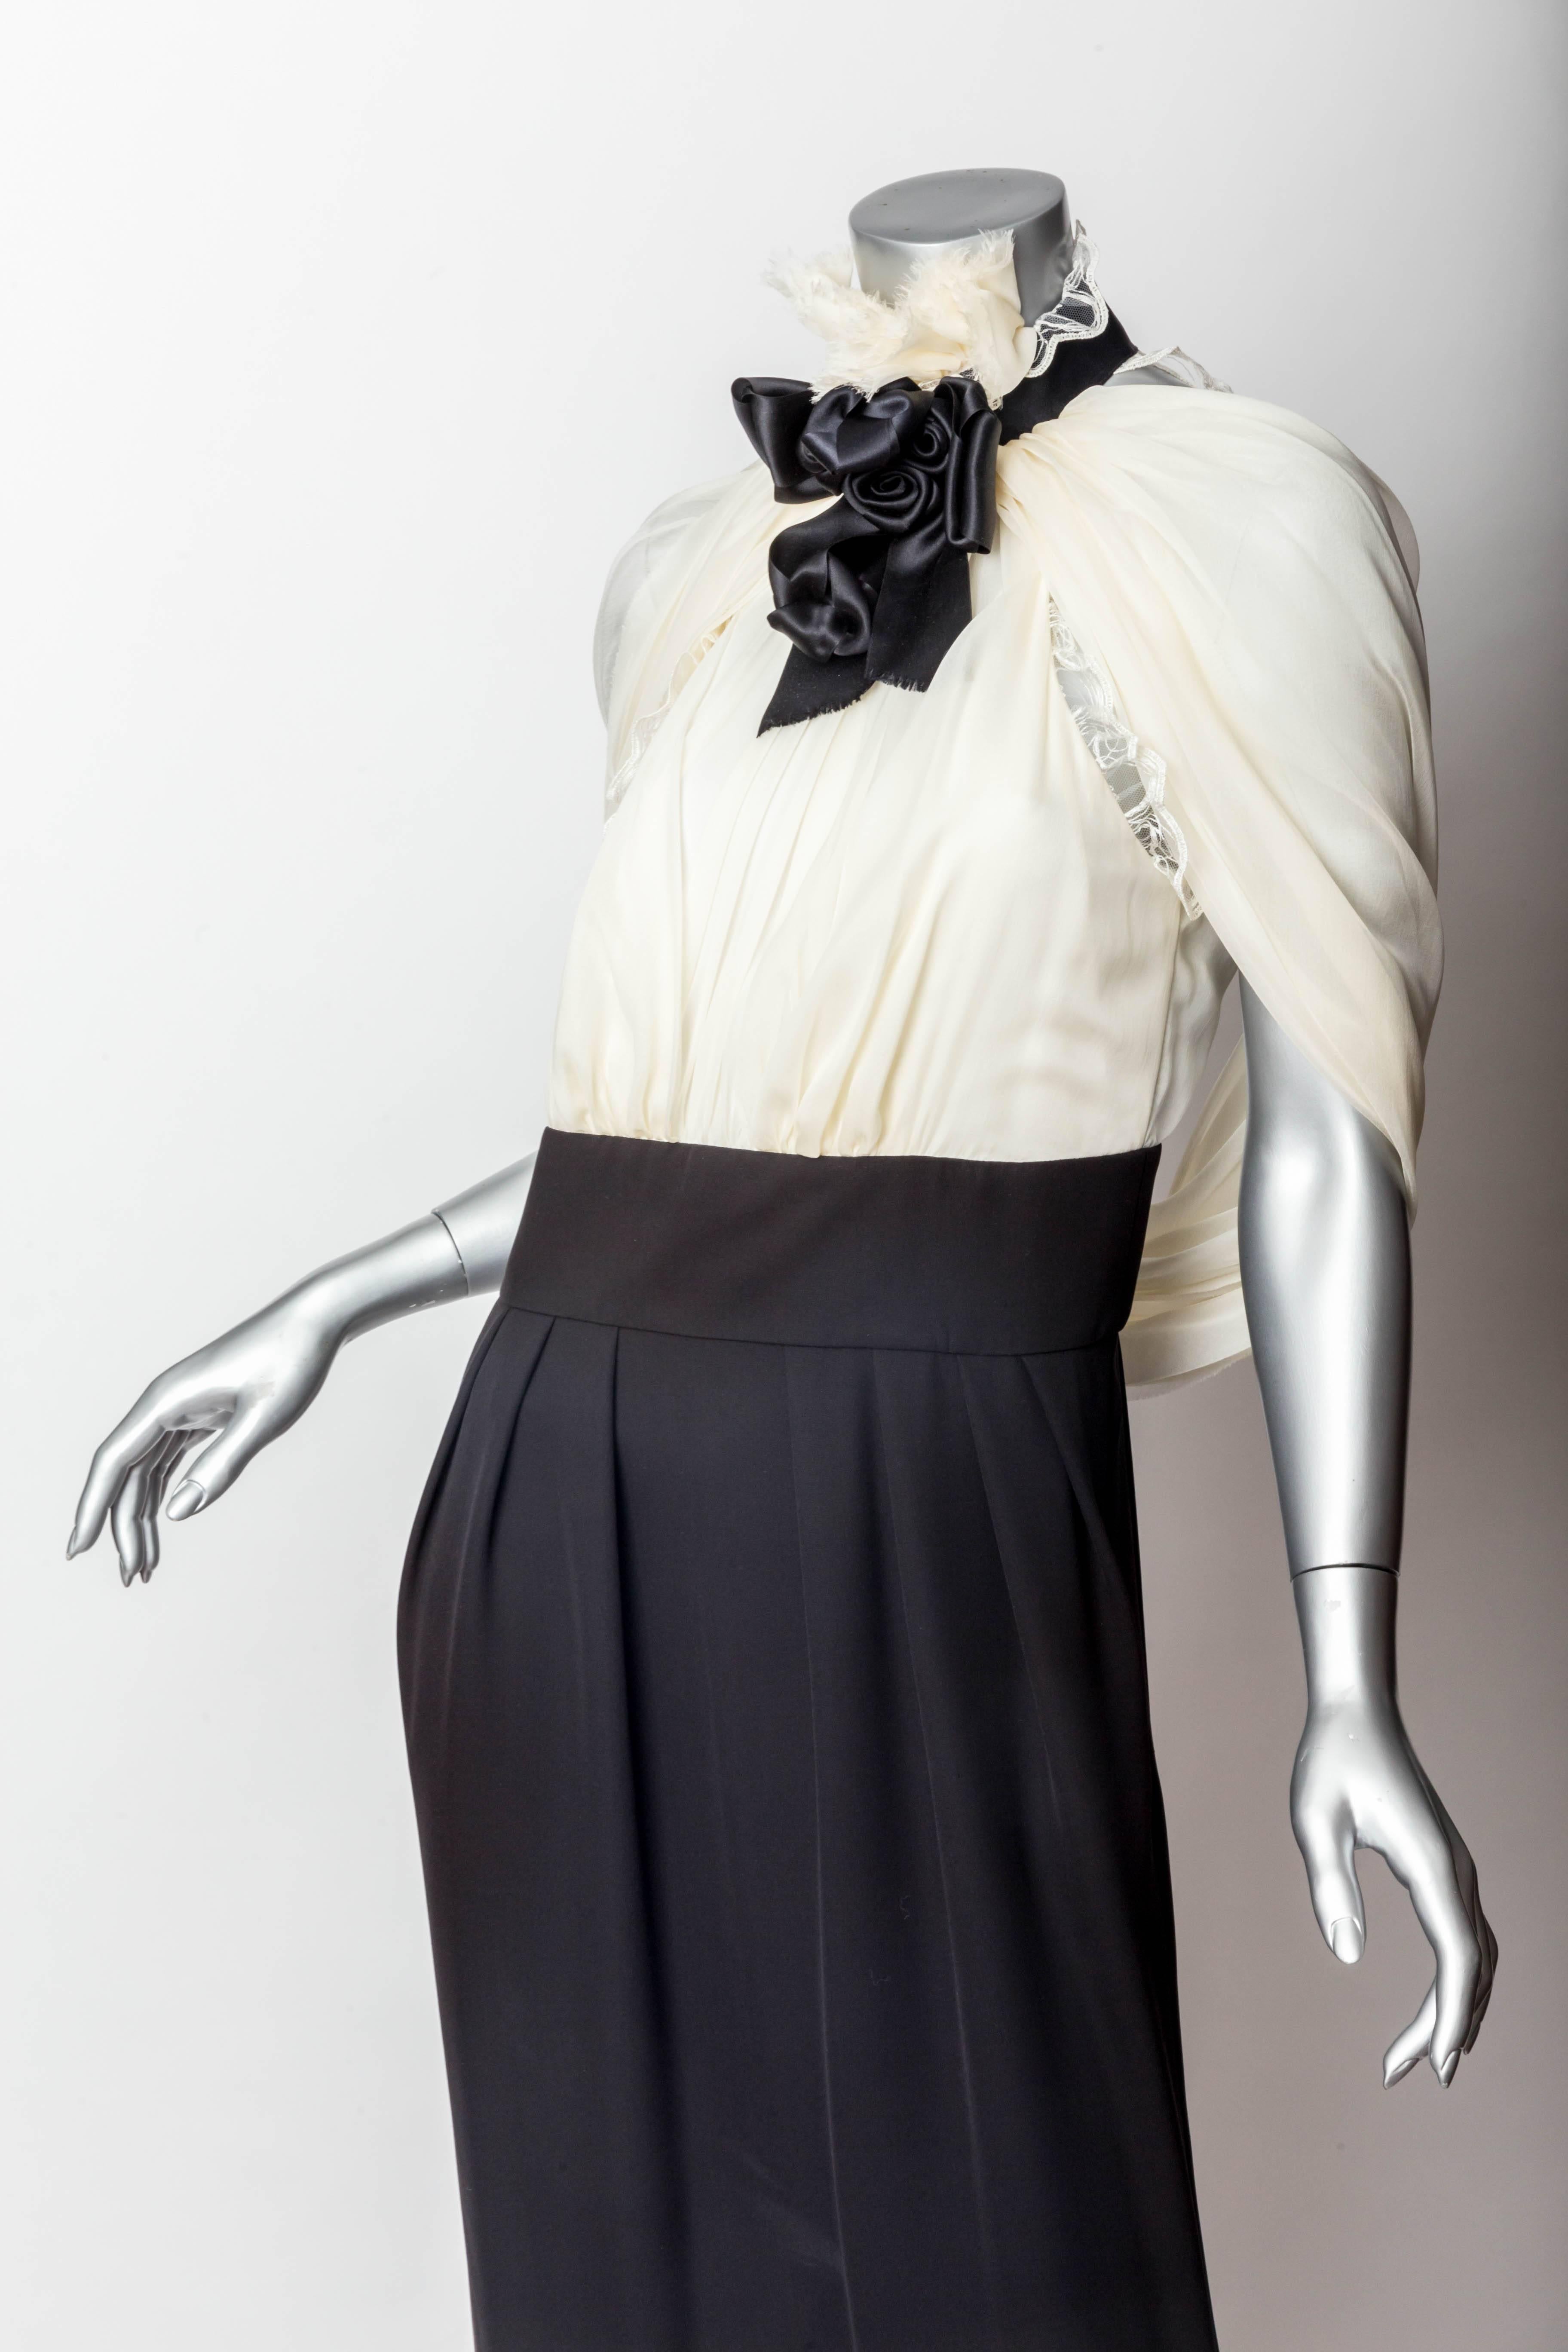 Wonderfully chic Chanel Evening Gown - Size 42
Ivory silk halter style top with sheer silk panels that can be worn to cover the shoulders or draped on the back of the dress.
Lace trim to top. 
Quintessential Chanel black silk bow detail to